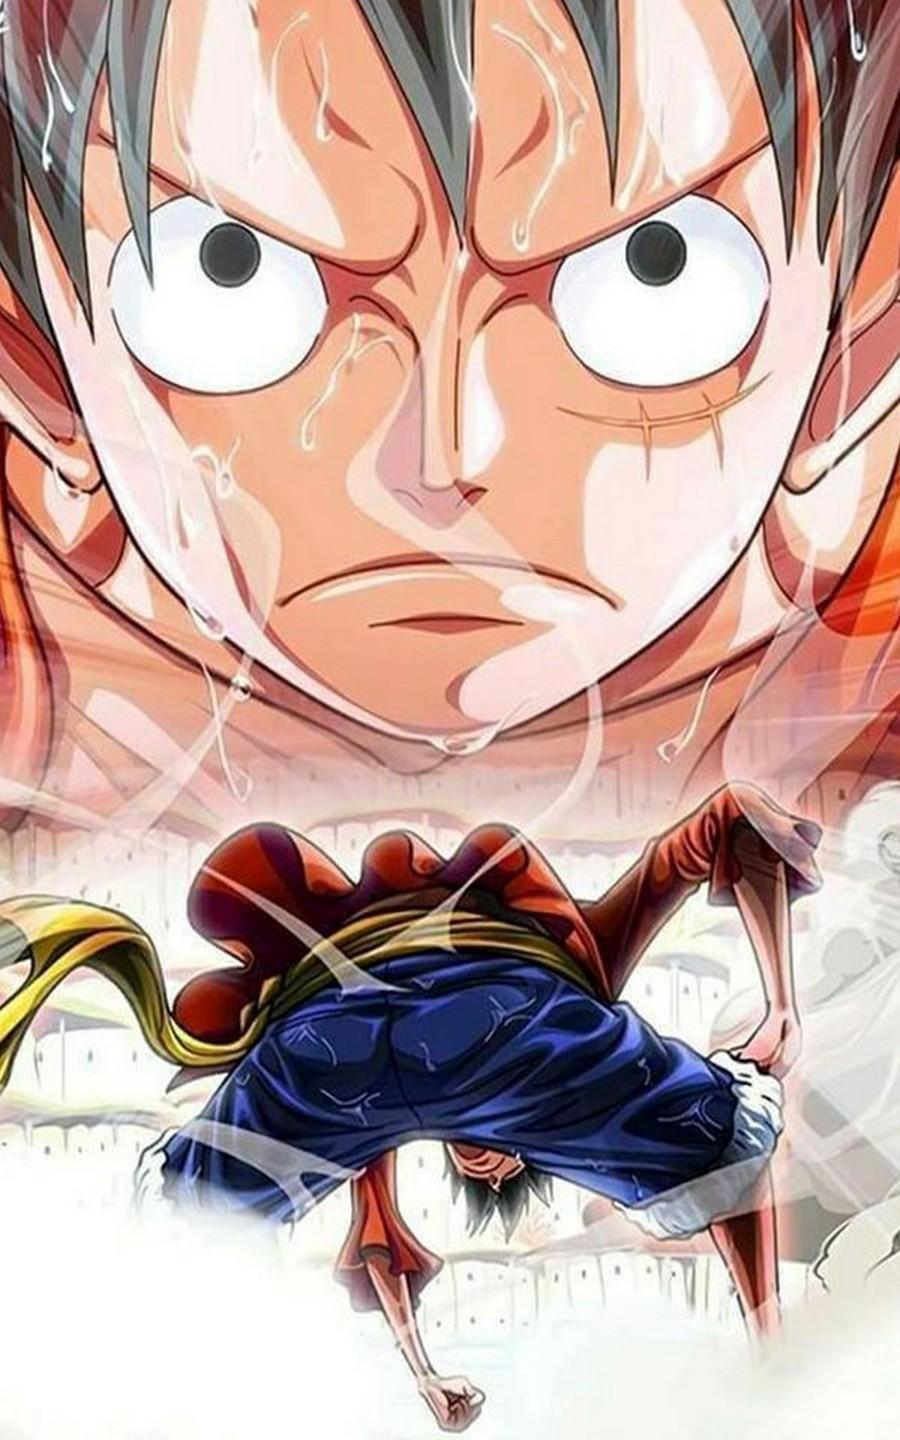 Monkey D Luffy Wallpapers Fansart For Android Apk Download - luffys hair roblox